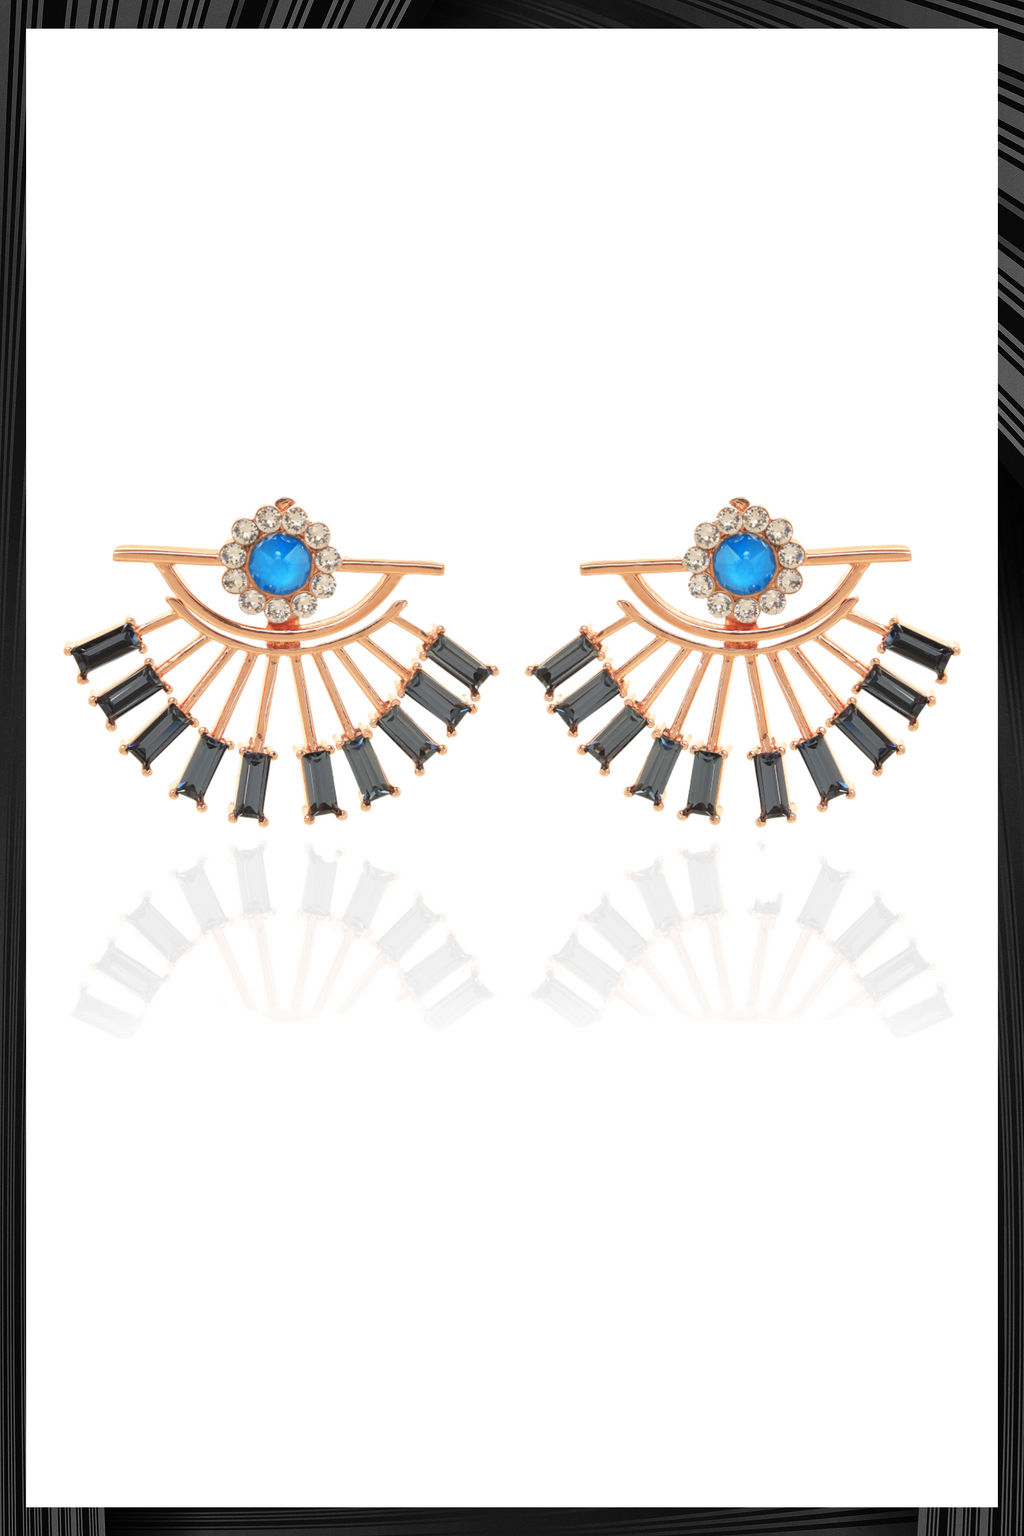 Cananry Earrings | Free Delivery - Quick Shipping